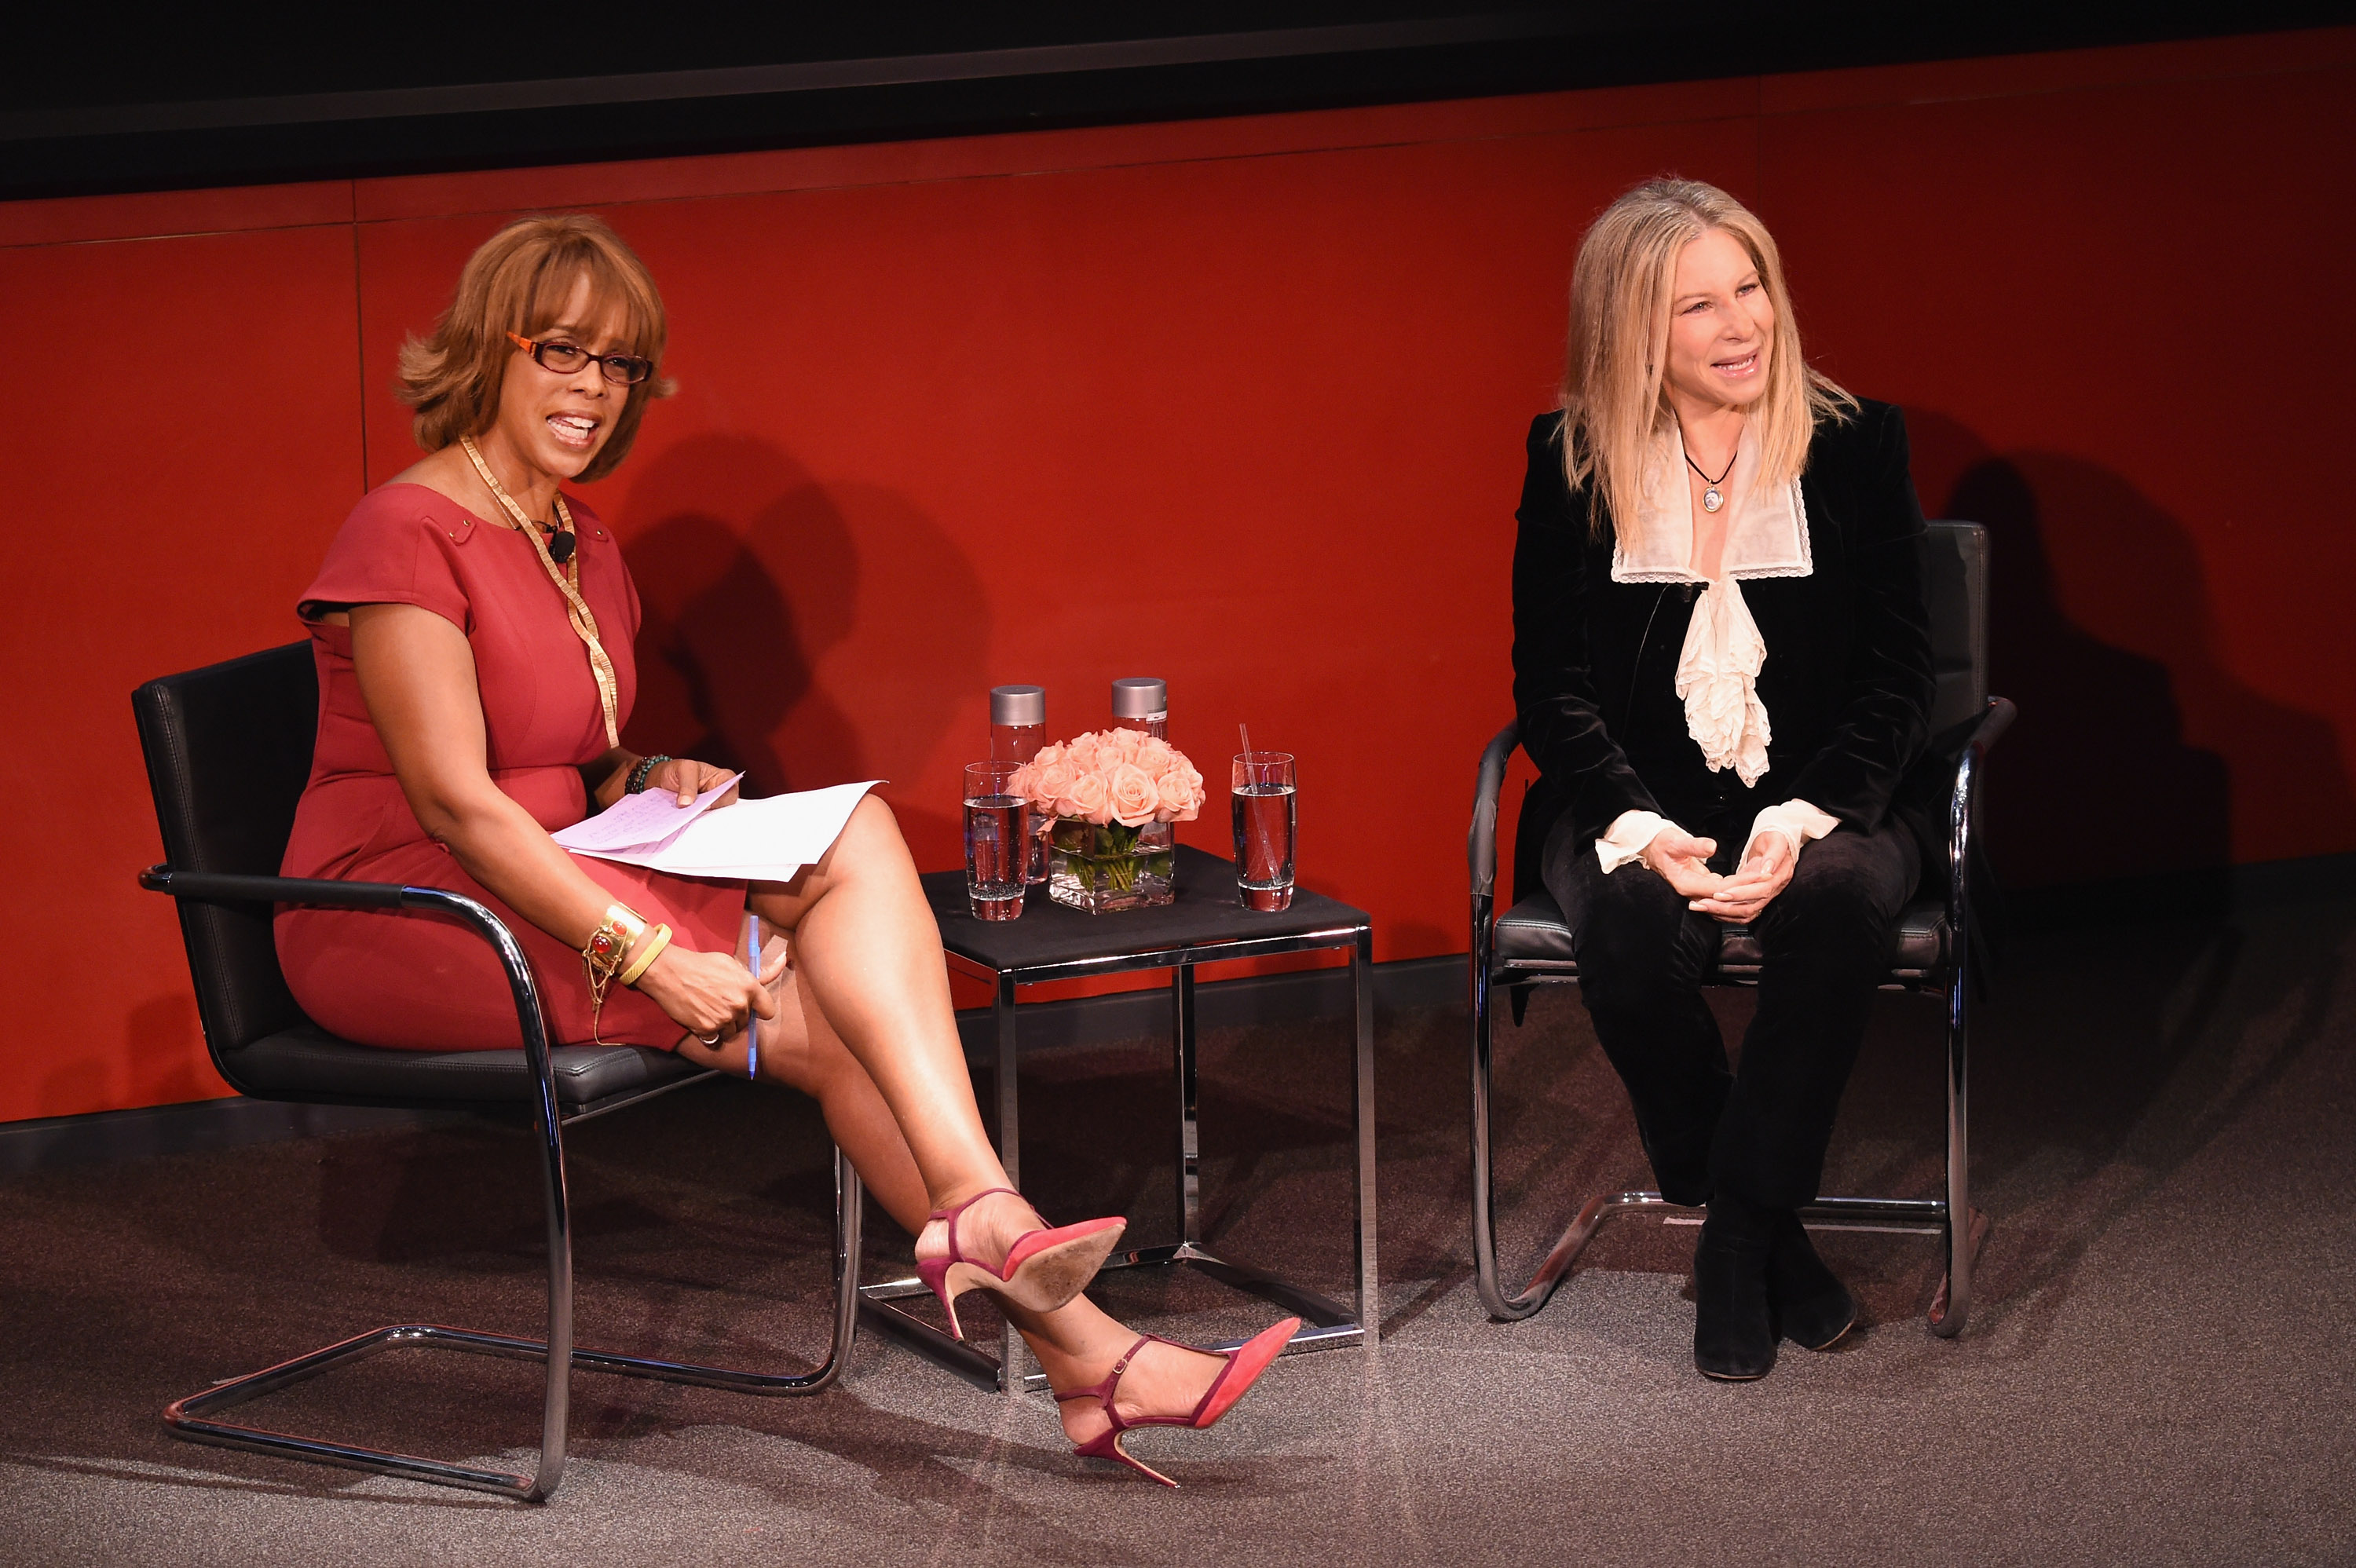 Barbra Streisand with Gayle King, co-host of CBS This Morning and editor at large for Hearst title O, the Oprah Magazine, unveiling the new Fight the Ladykiller PSA at a Hearst Master Class.